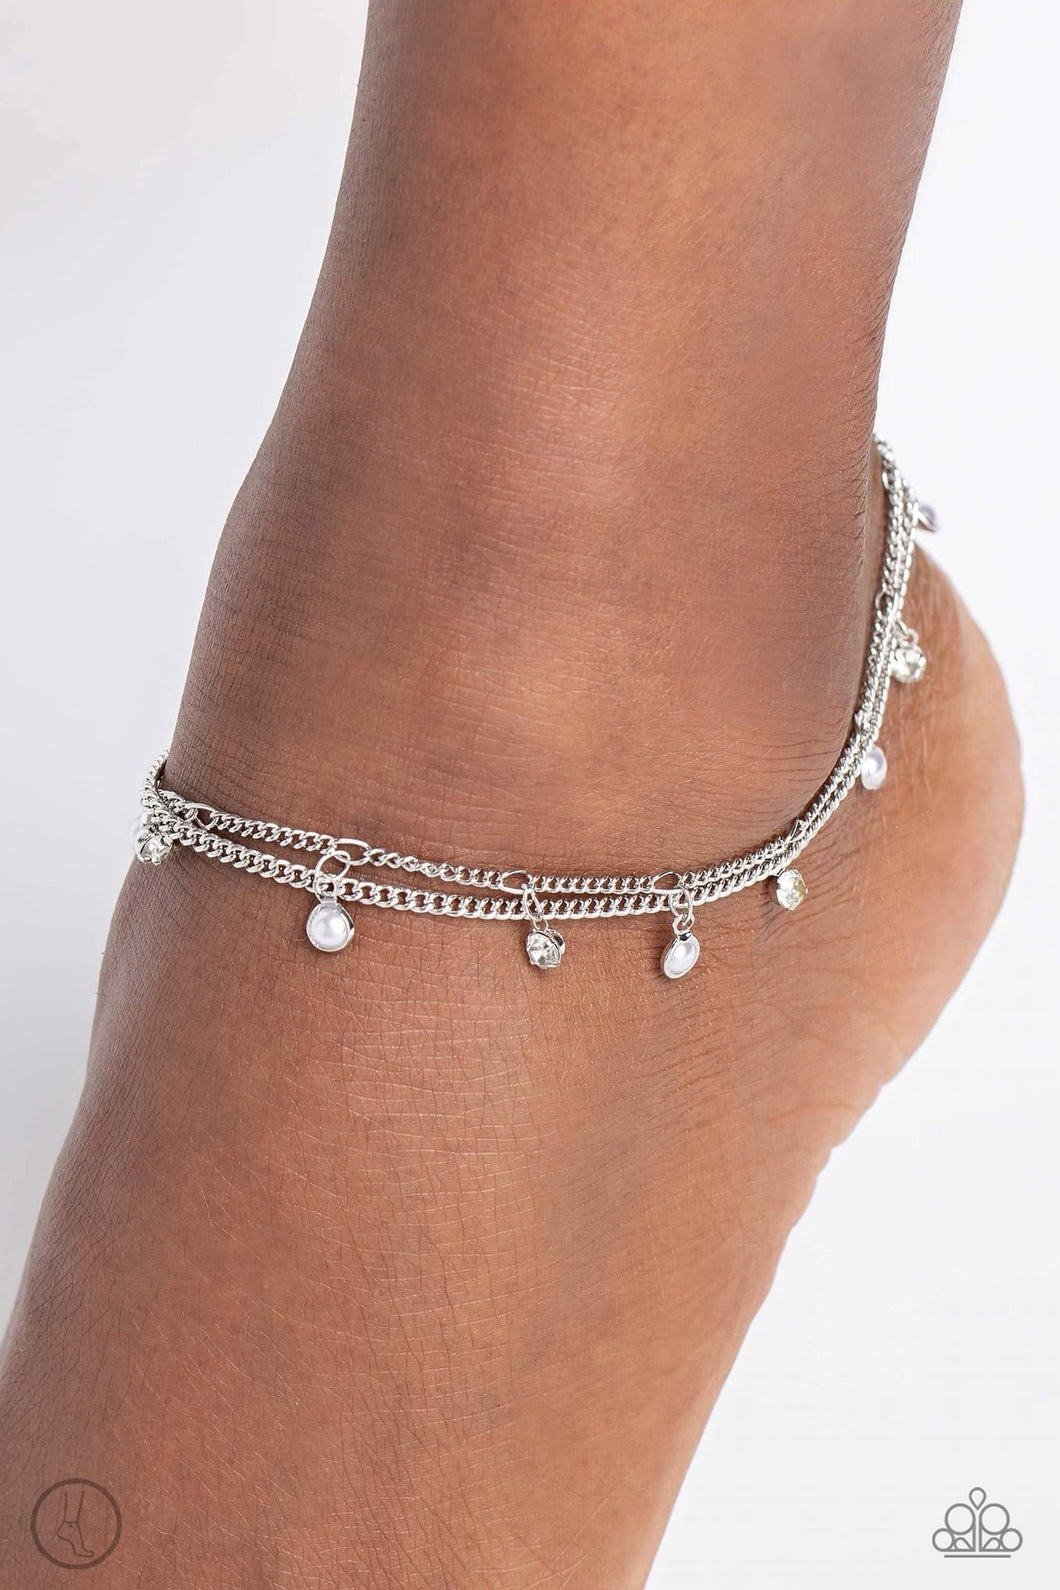 Paparazzi WATER You Waiting For? - White Anklet